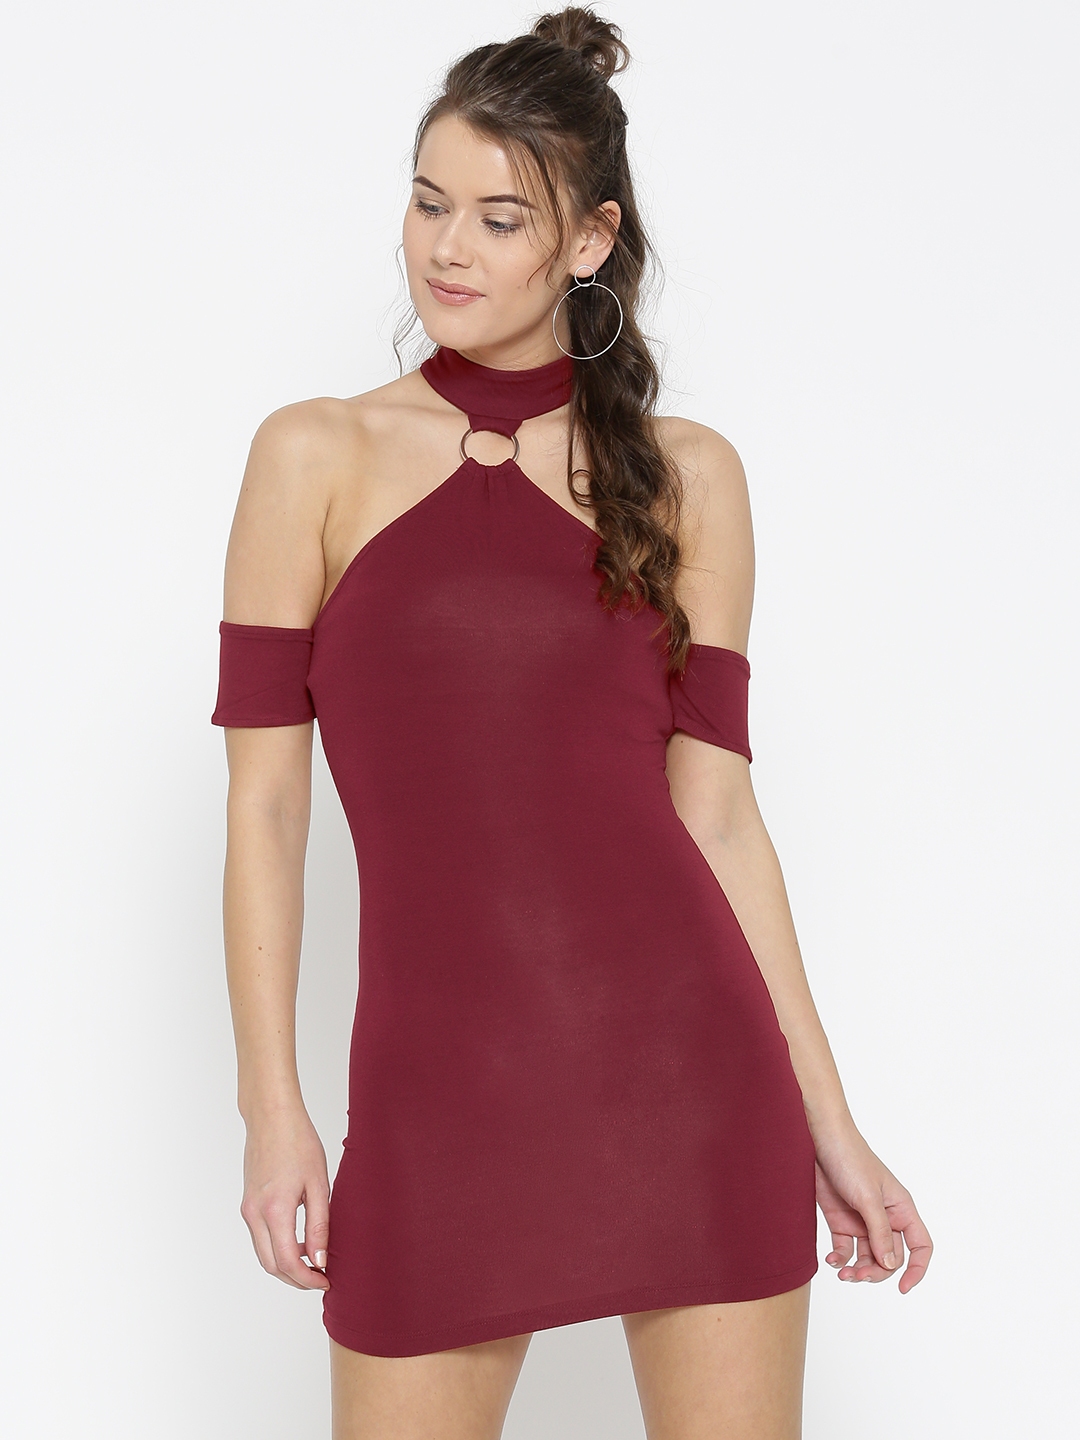 Buy FOREVER 21 Women Maroon Solid Bodycon Dress Dresses